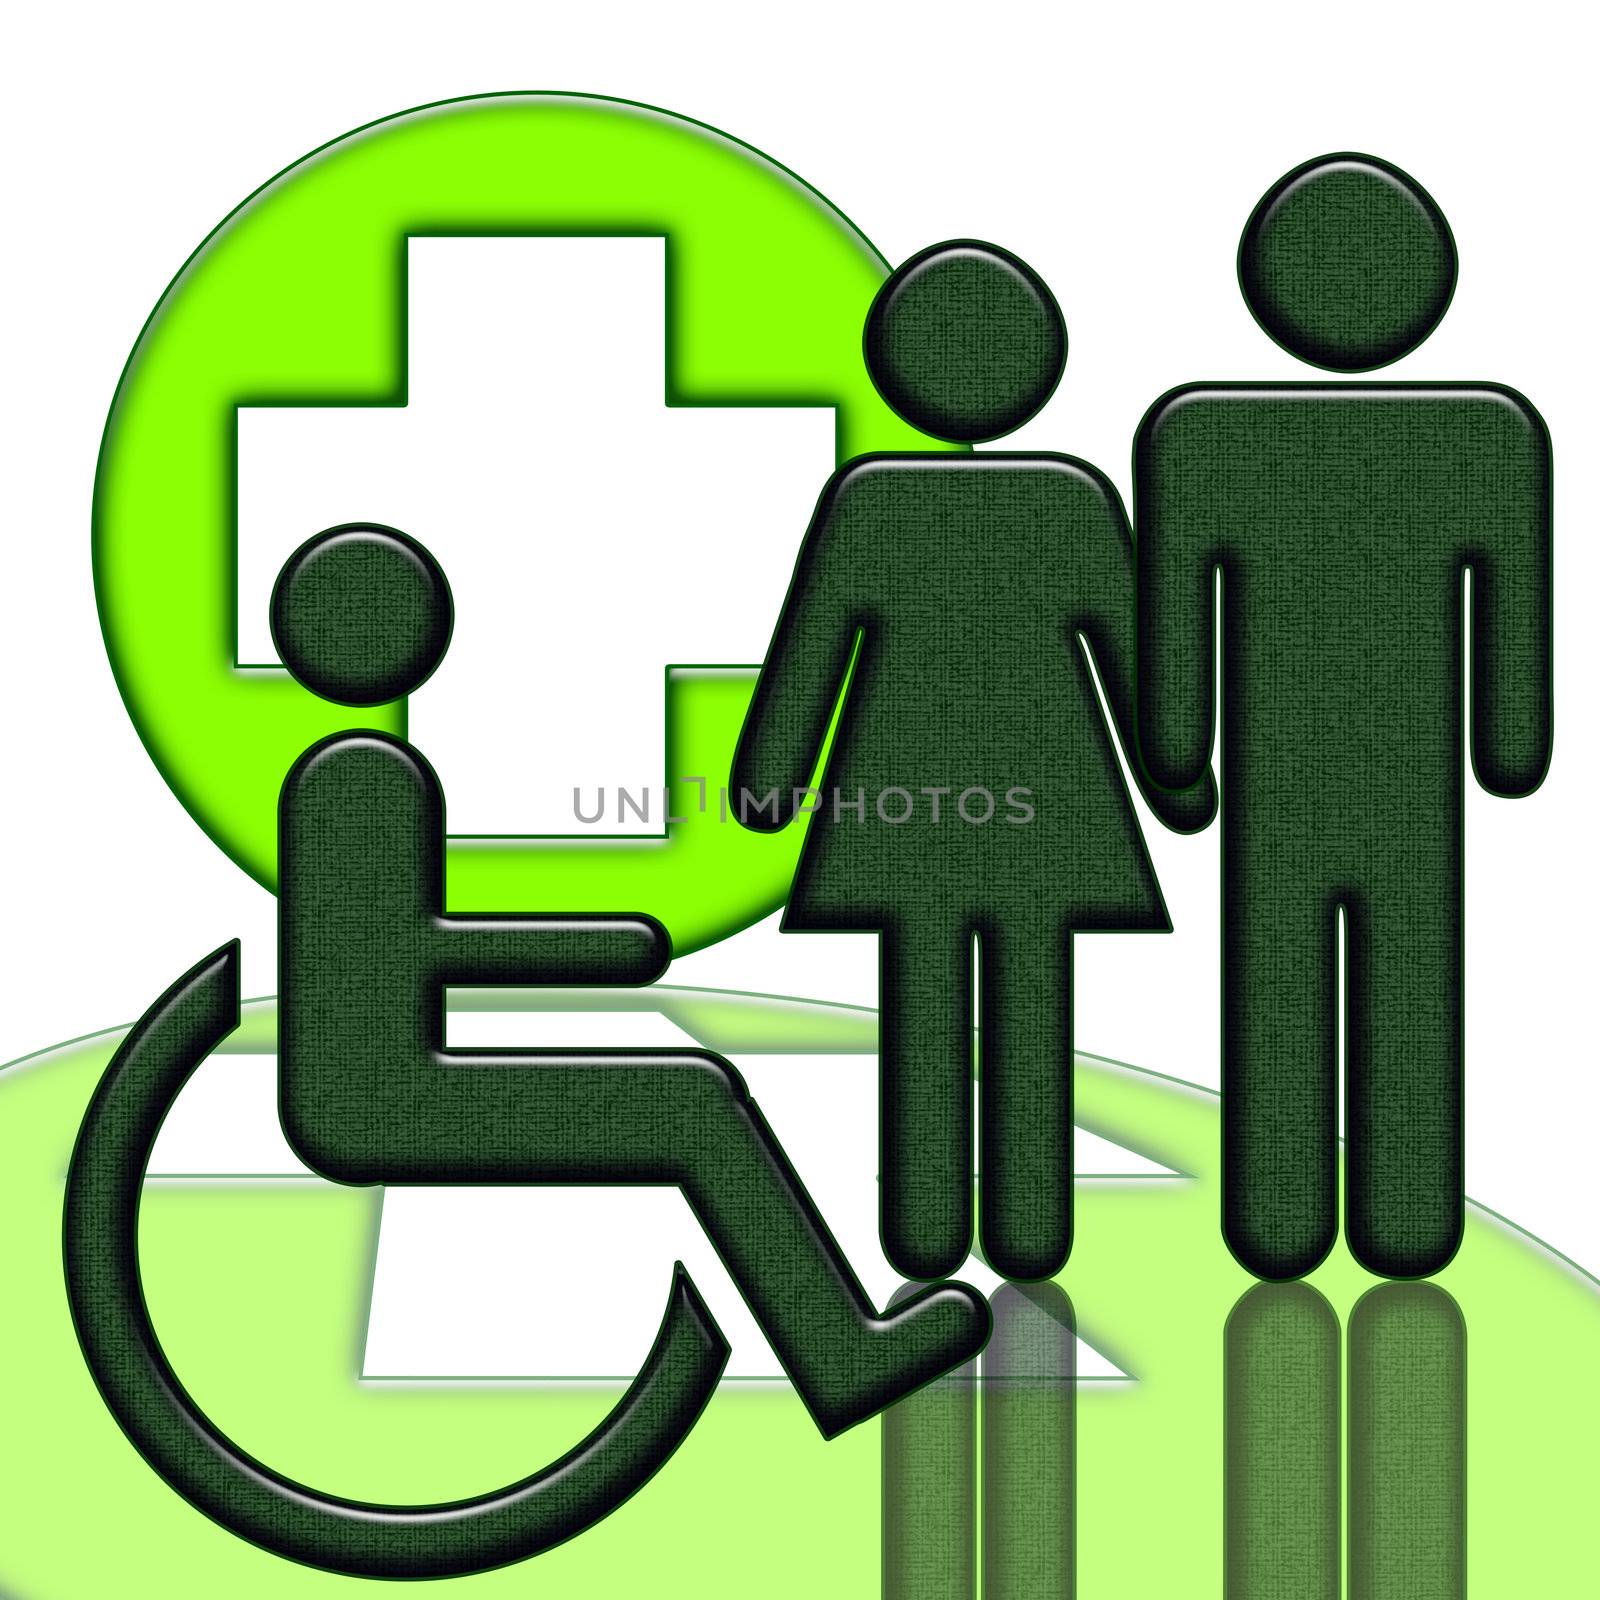 Handicapped person medical help icon isolated over white background